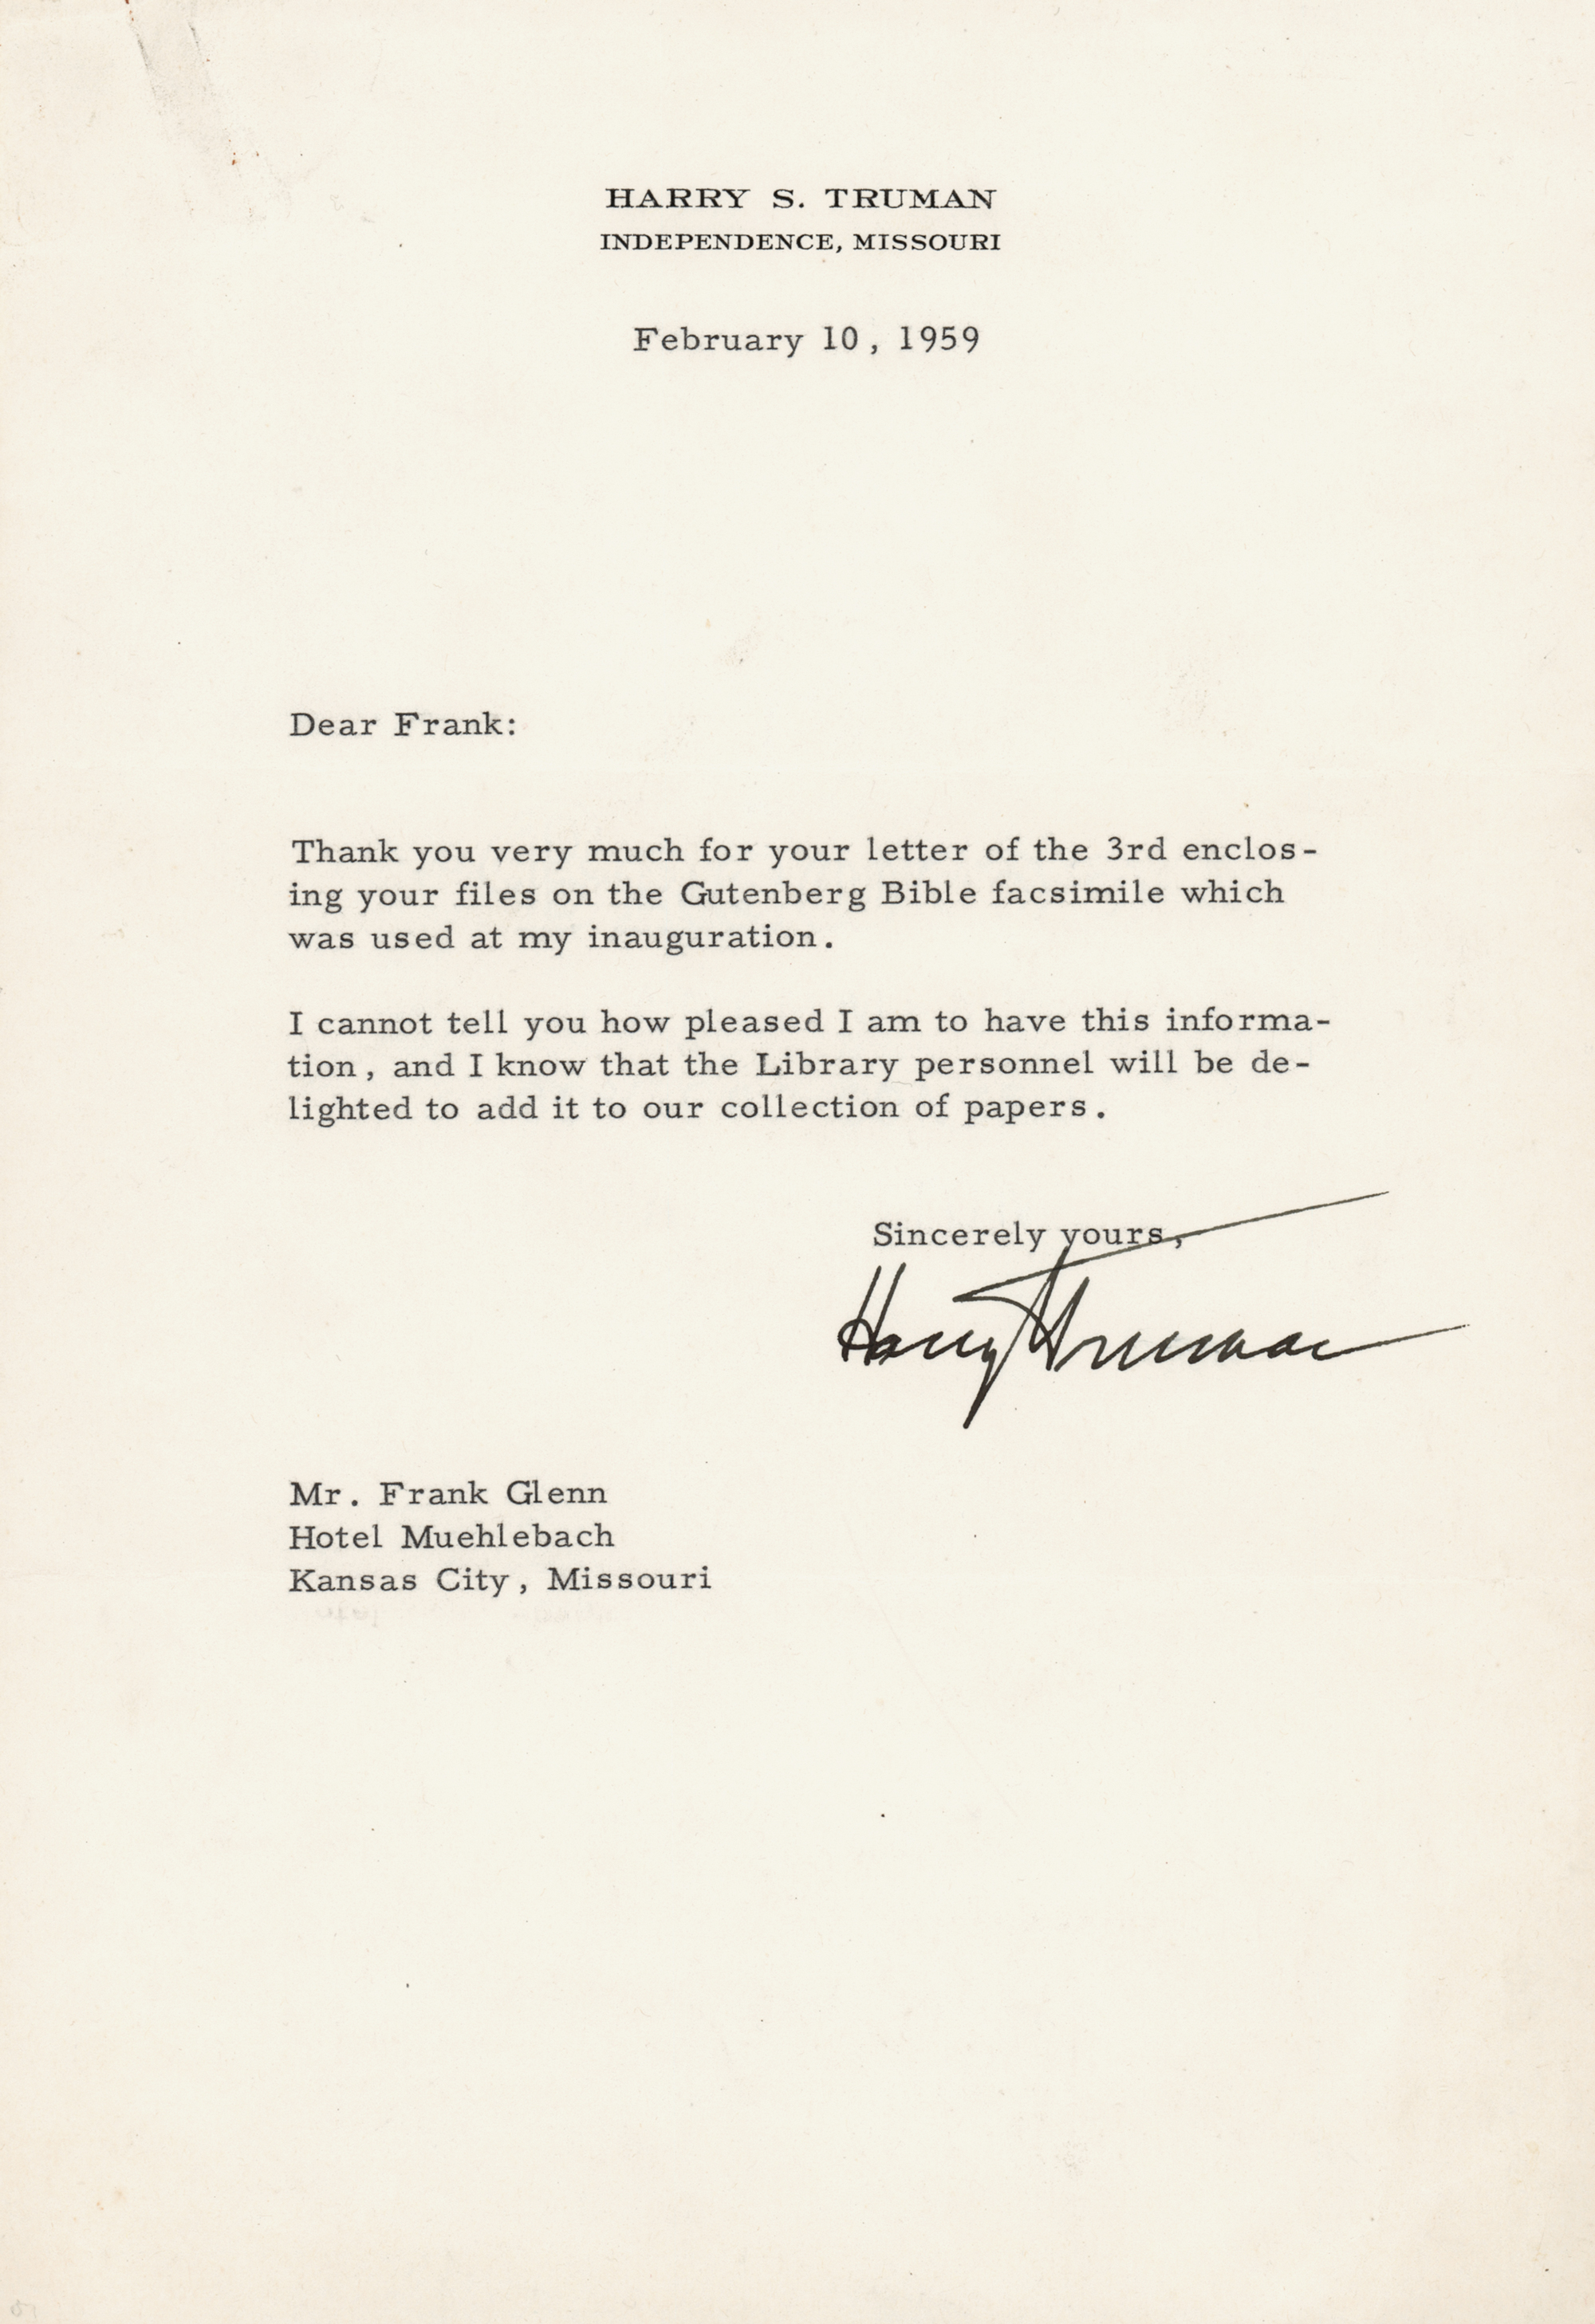 Lot #70 Harry S. Truman Typed Letter Signed on the Inaugural Gutenberg Bible - Image 1